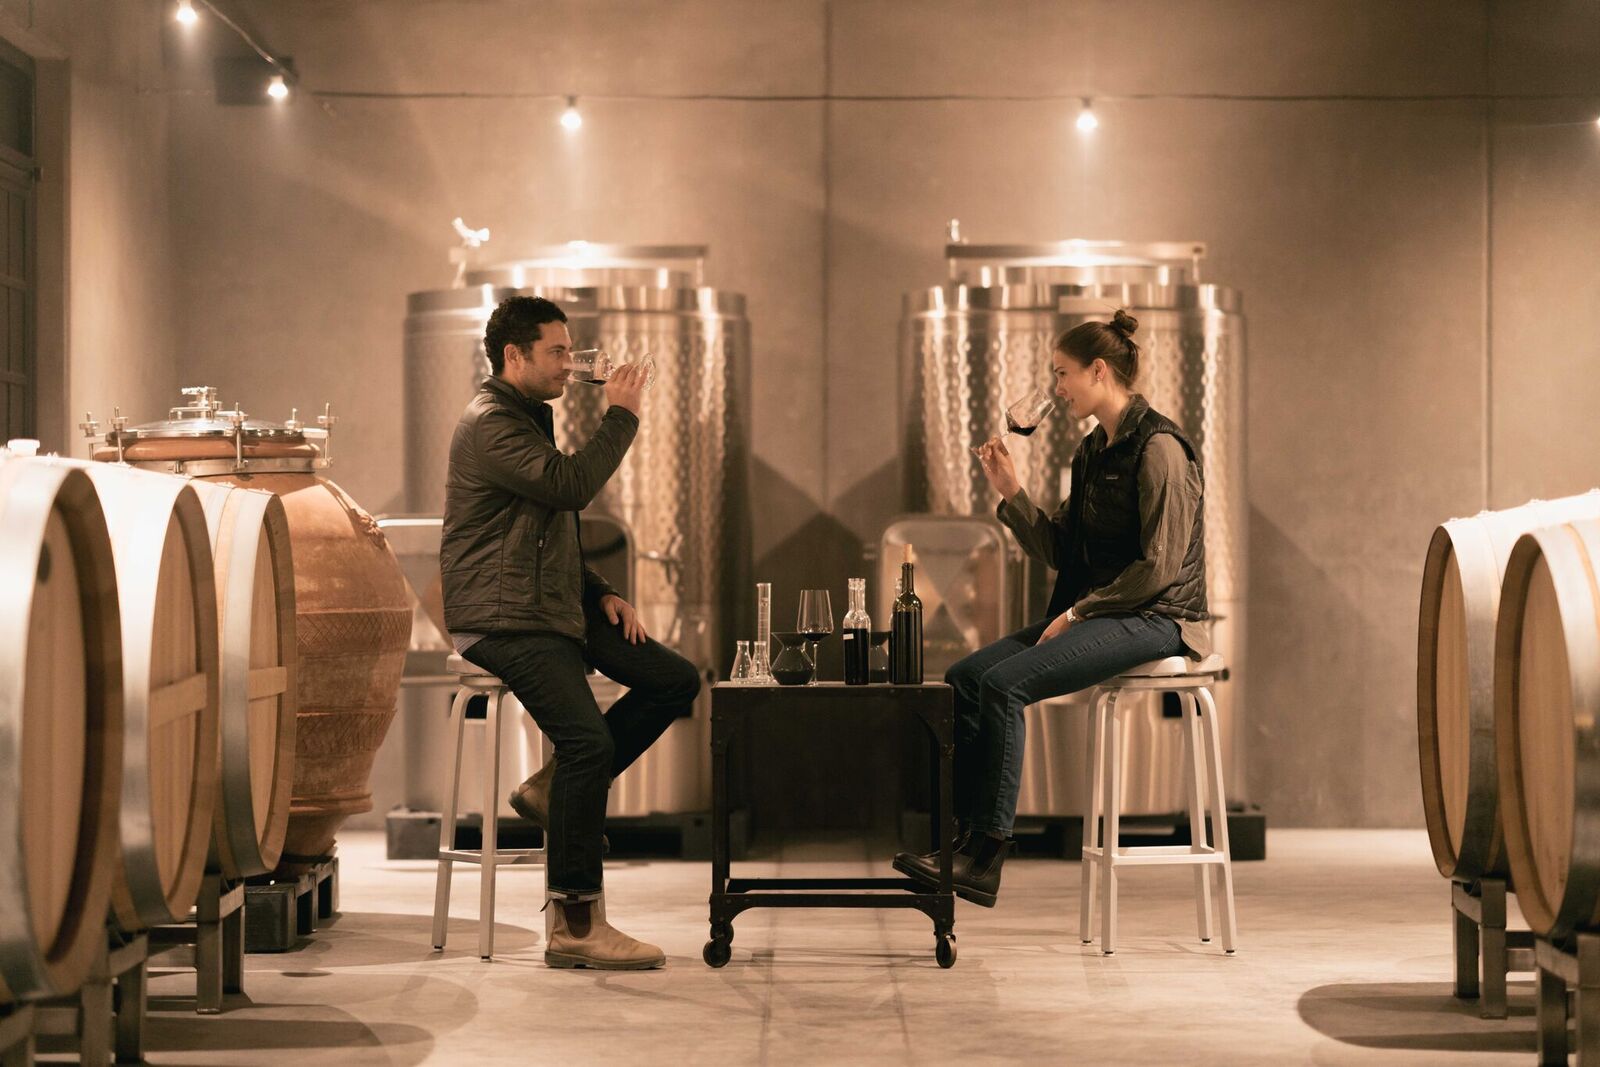 Helianthus Wine - Jason and Jessica in the cellar